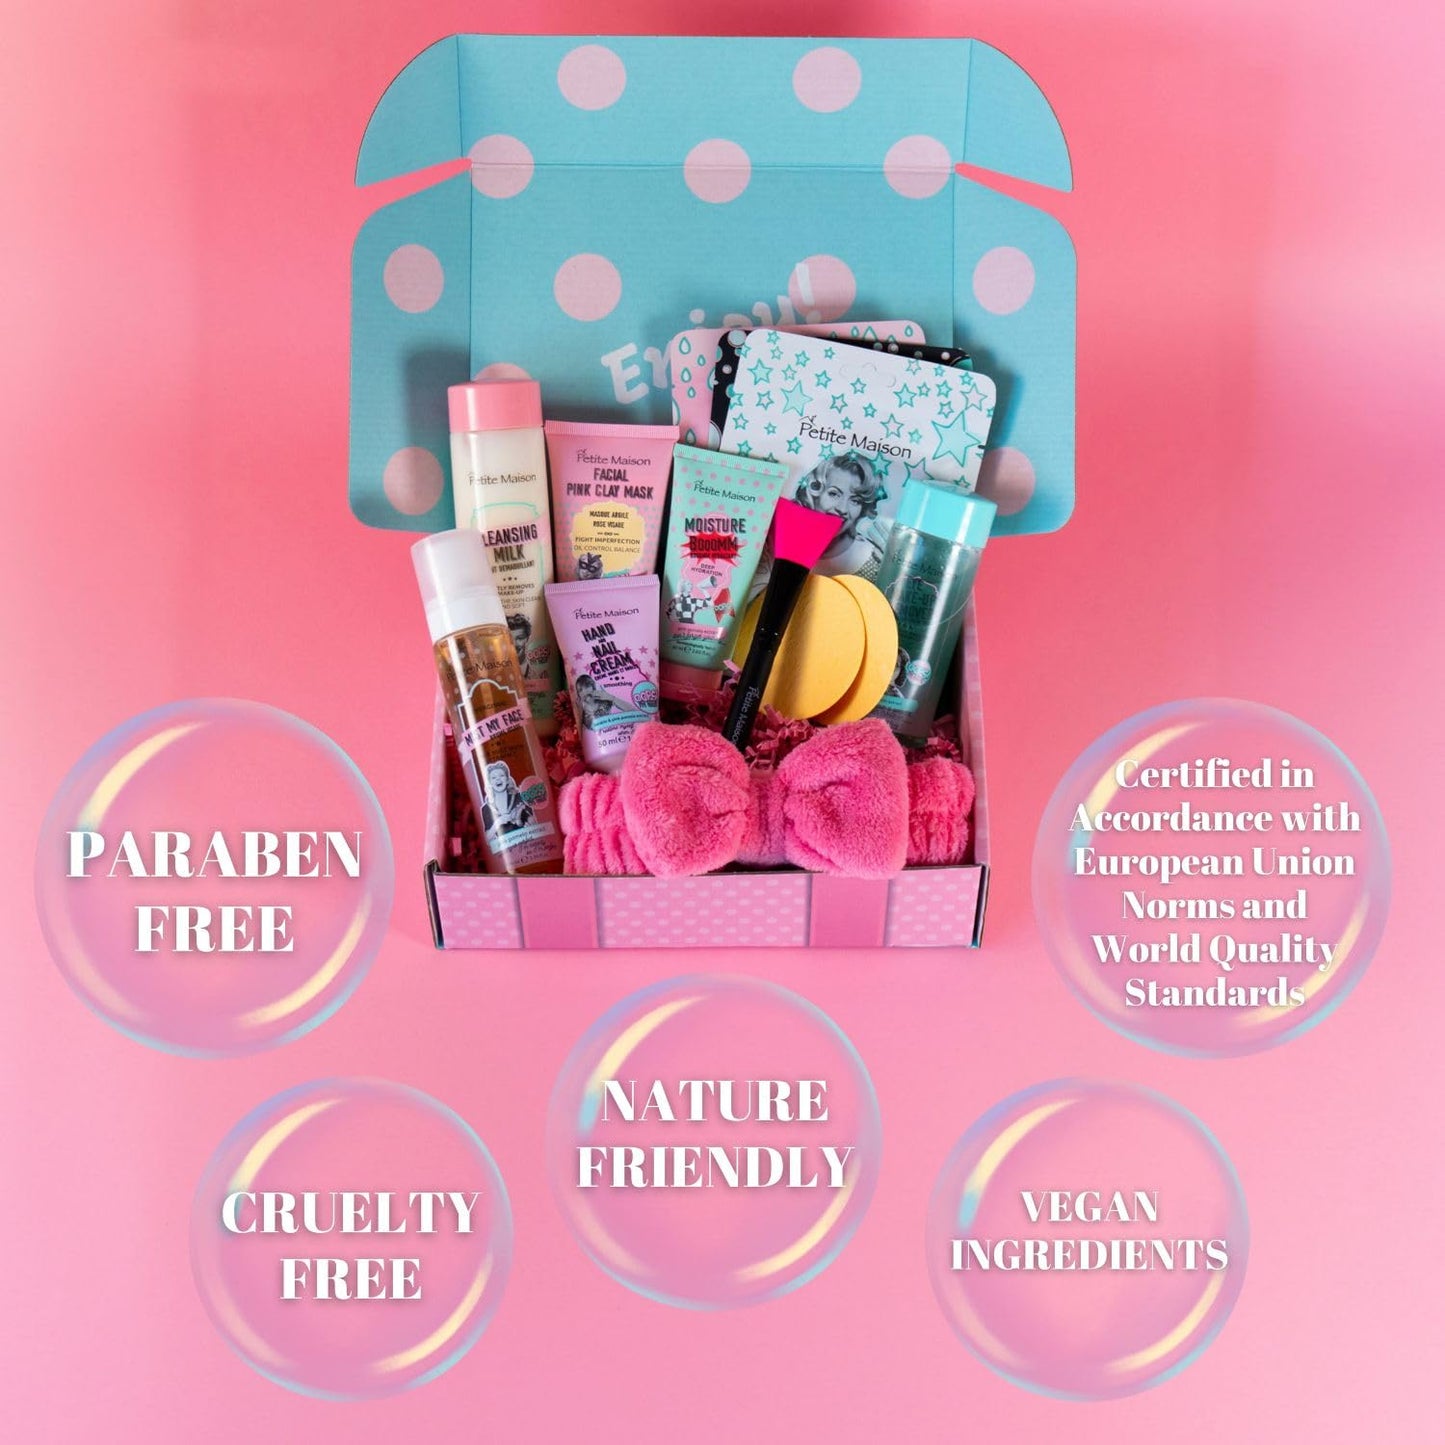 "Ultimate Pampering Gift Set for Women - 13-Piece Beauty Kit in a Stylish Gift Box - Perfect for Birthdays and Teenage Girls - Indulge in Luxurious Skincare Products"